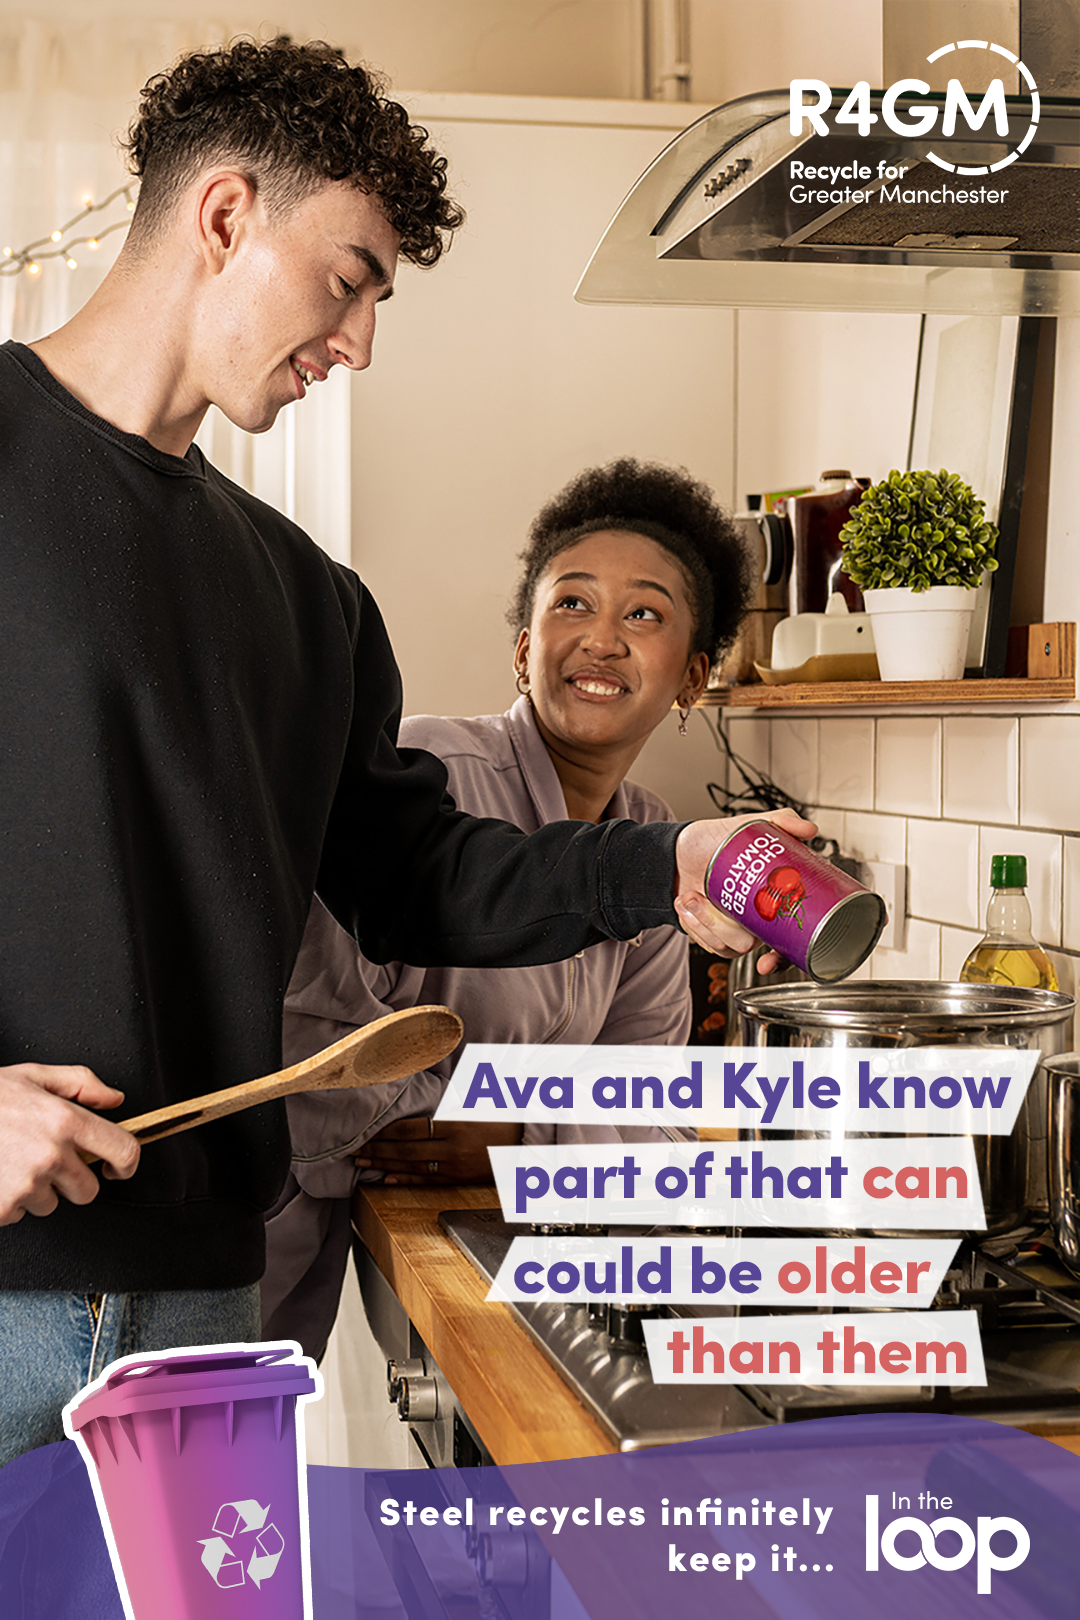 Image of two people pouring contents from tinned tomatoes into pot on stove, with wording Ava and kyle know part of that can could be older than them, steel recycles infinitely, keep it in the loop